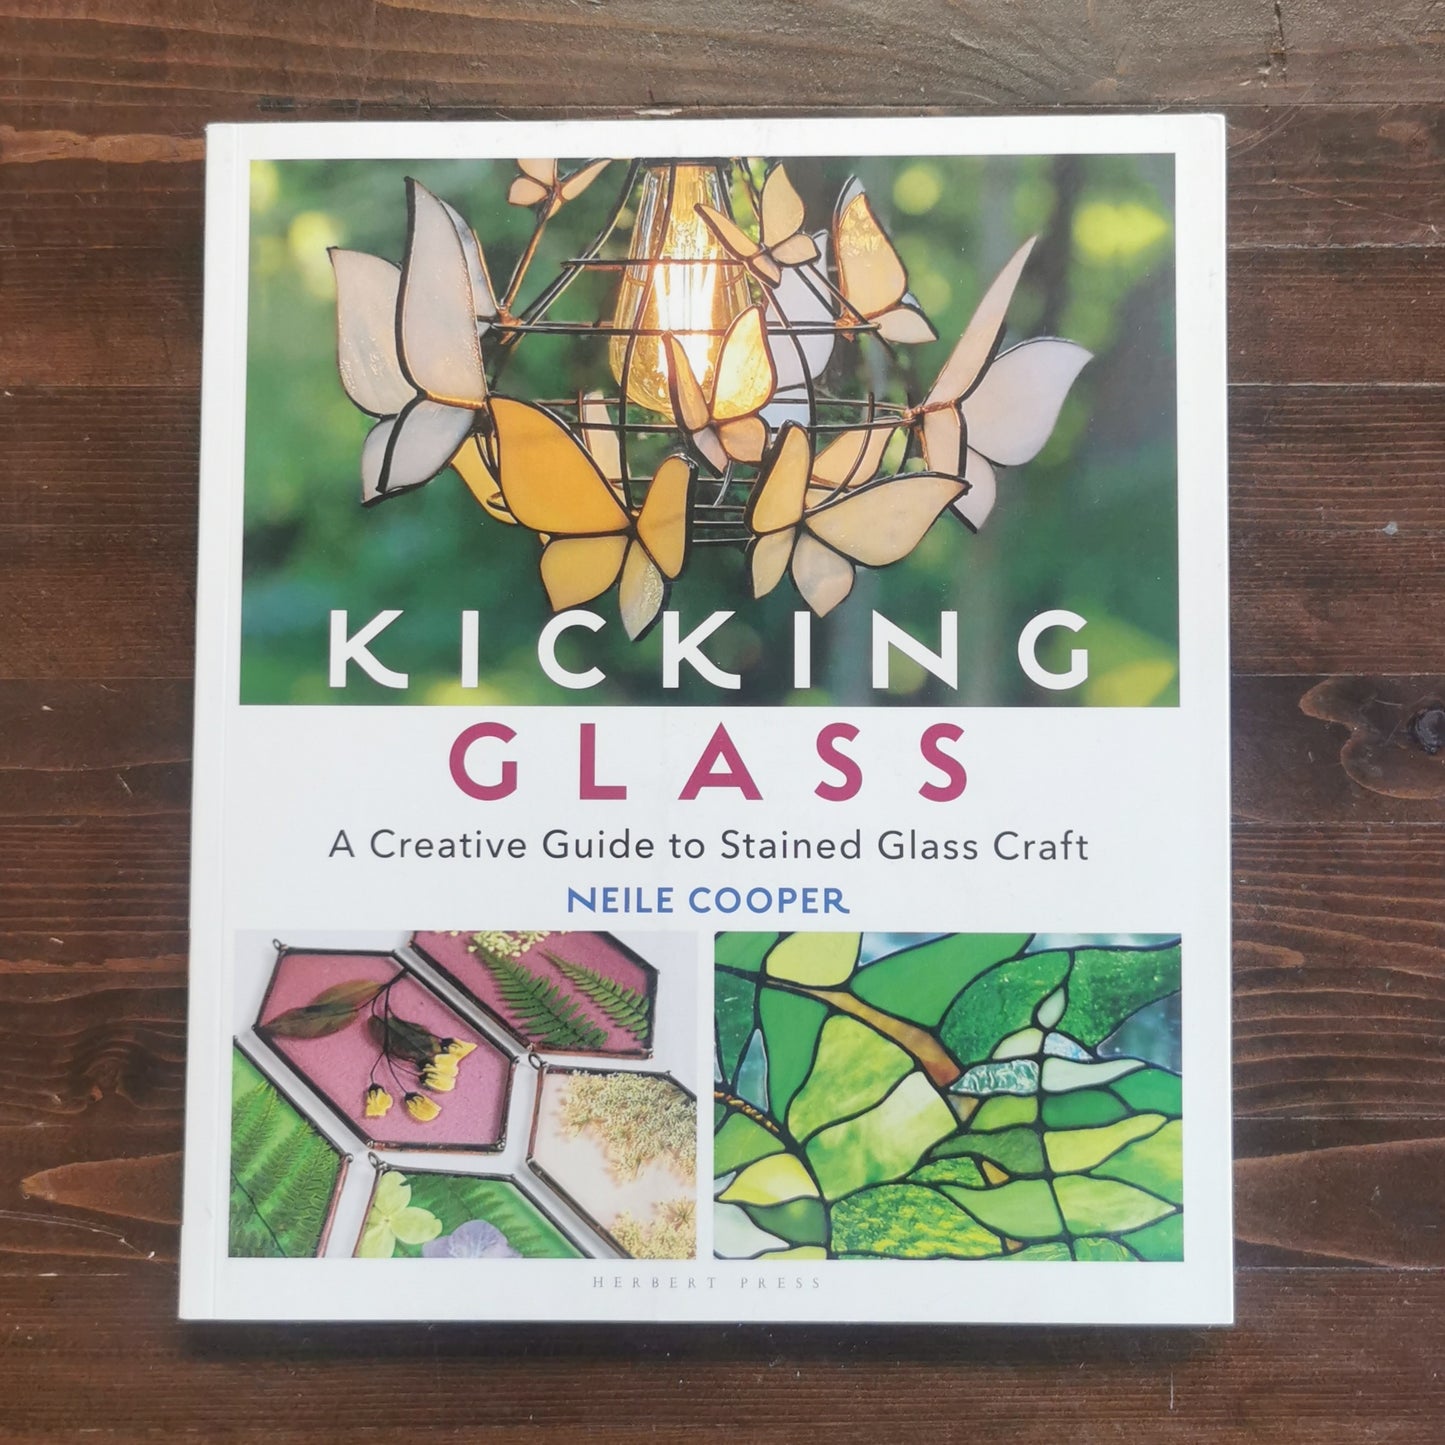 Kicking Glass by Neile Cooper